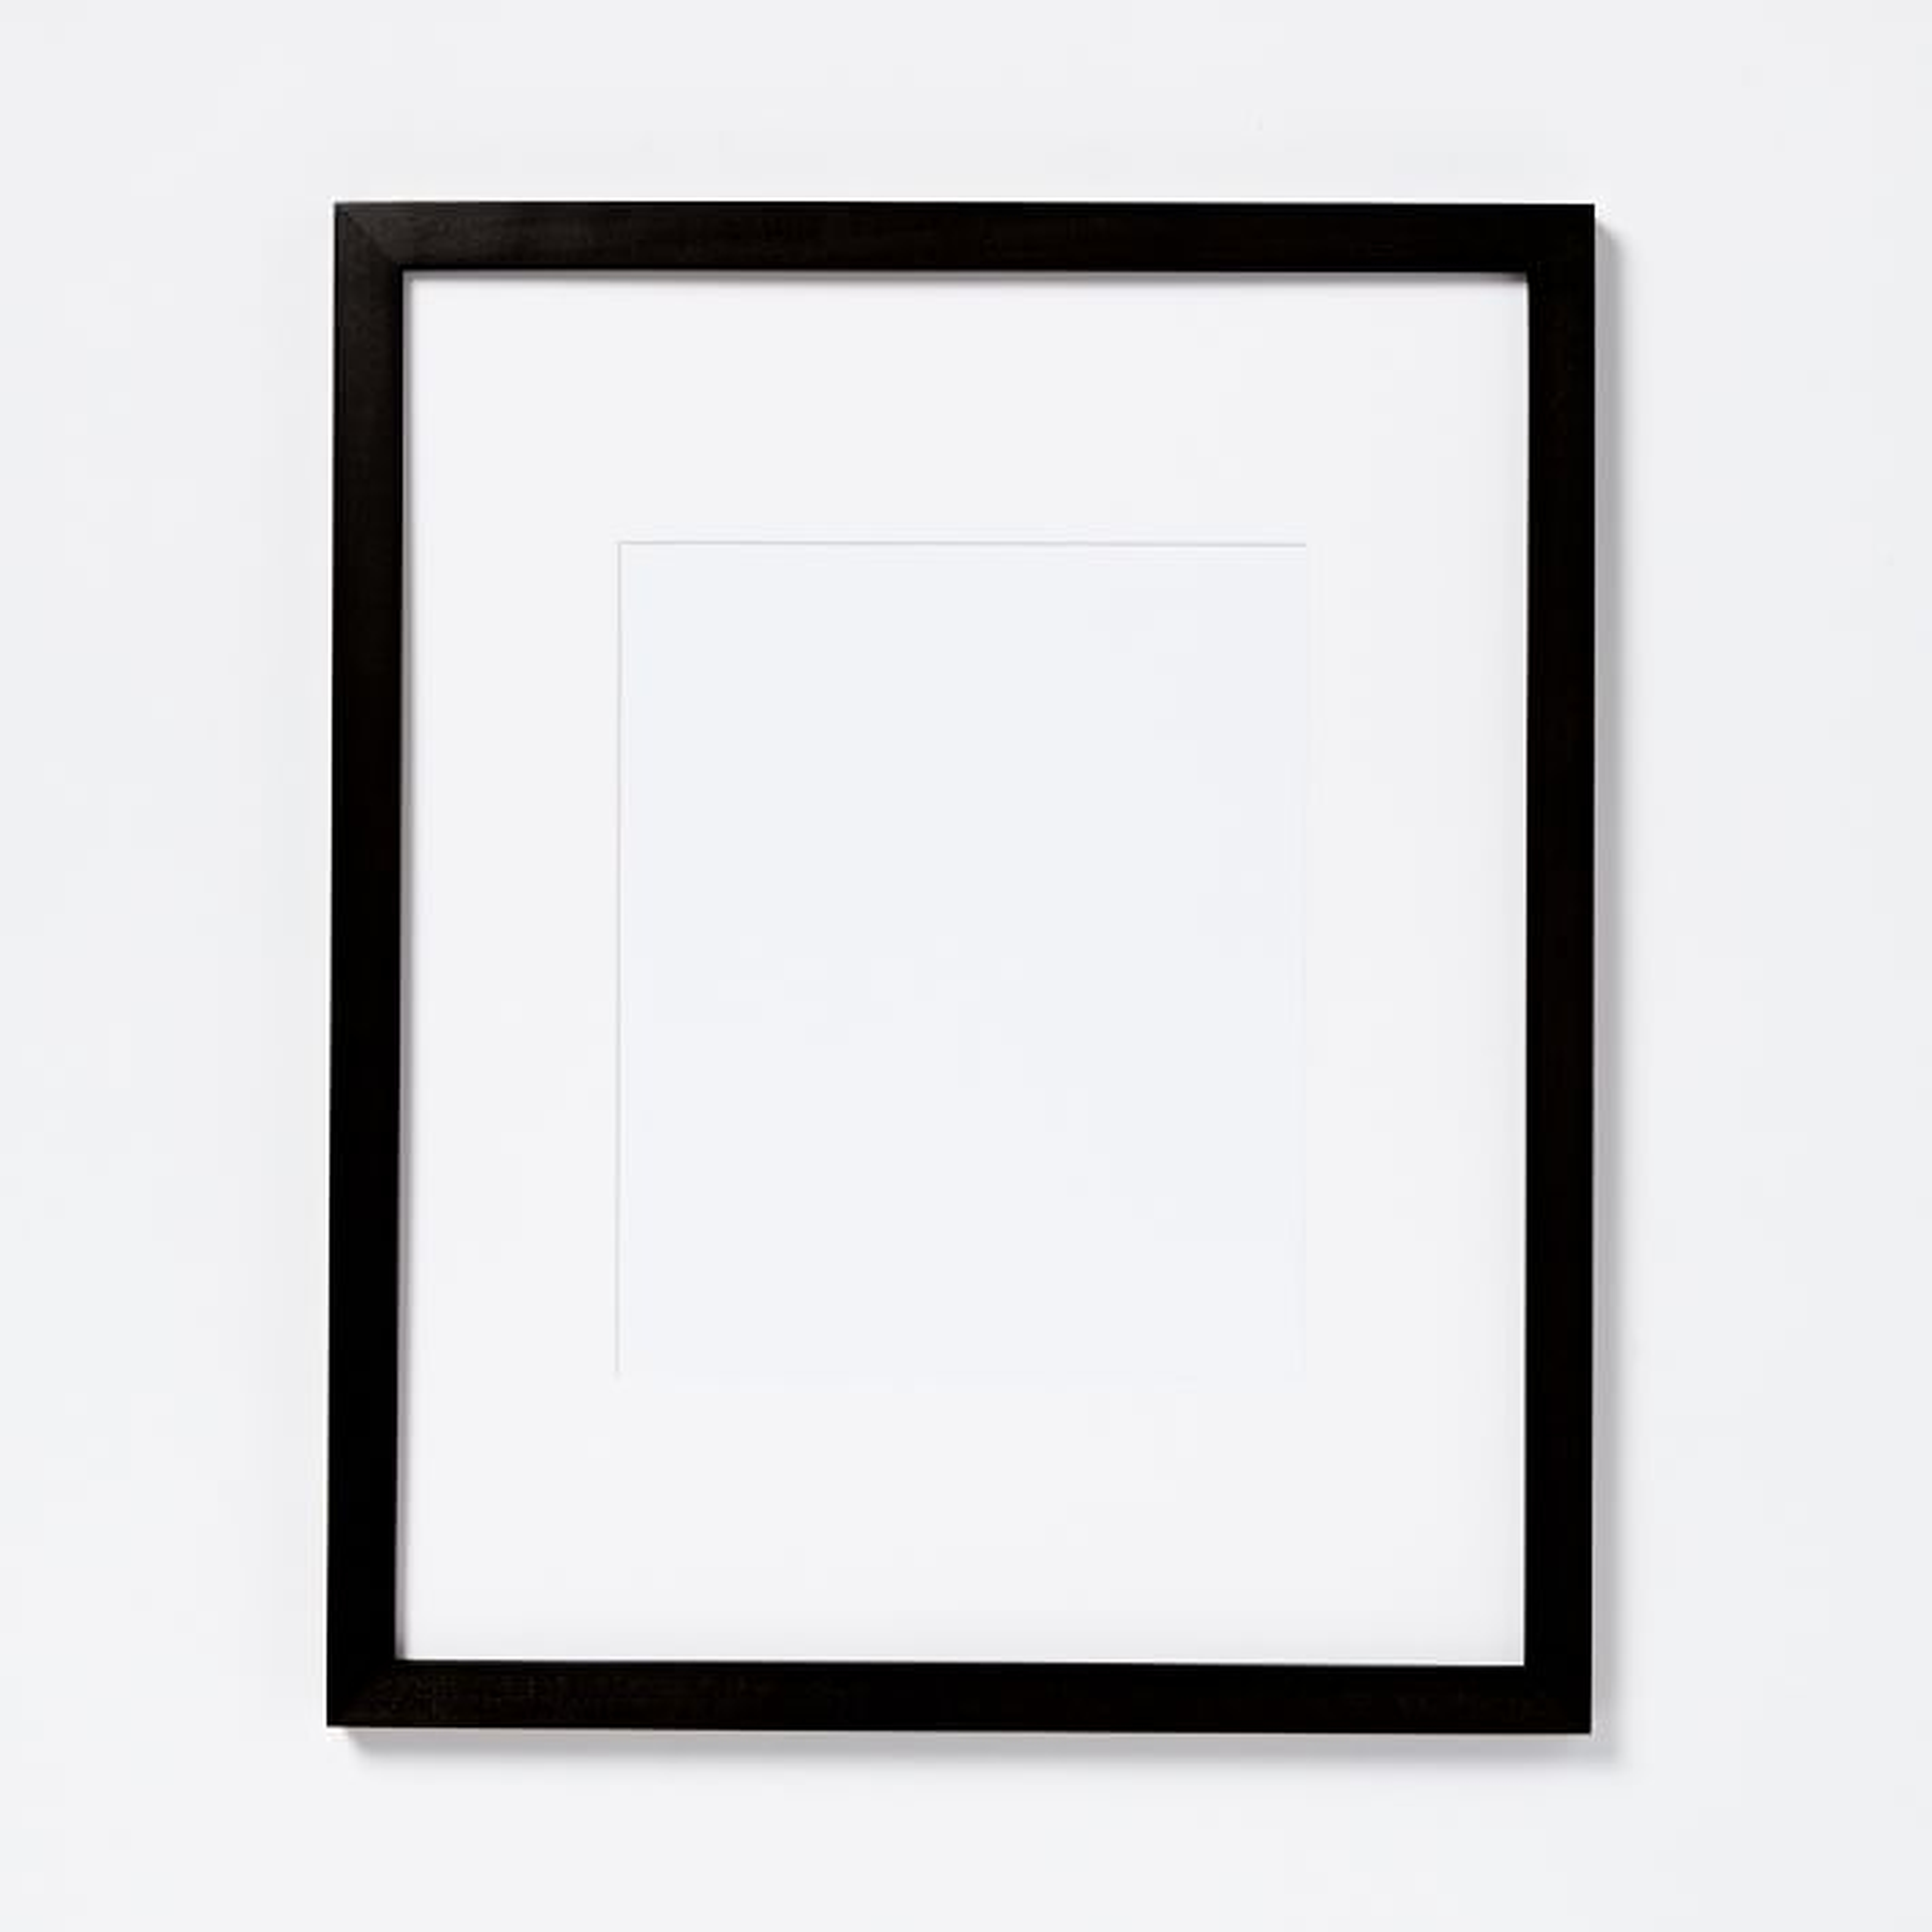 Gallery Frames - Black, 8x10, 13"x 16" without mat - West Elm